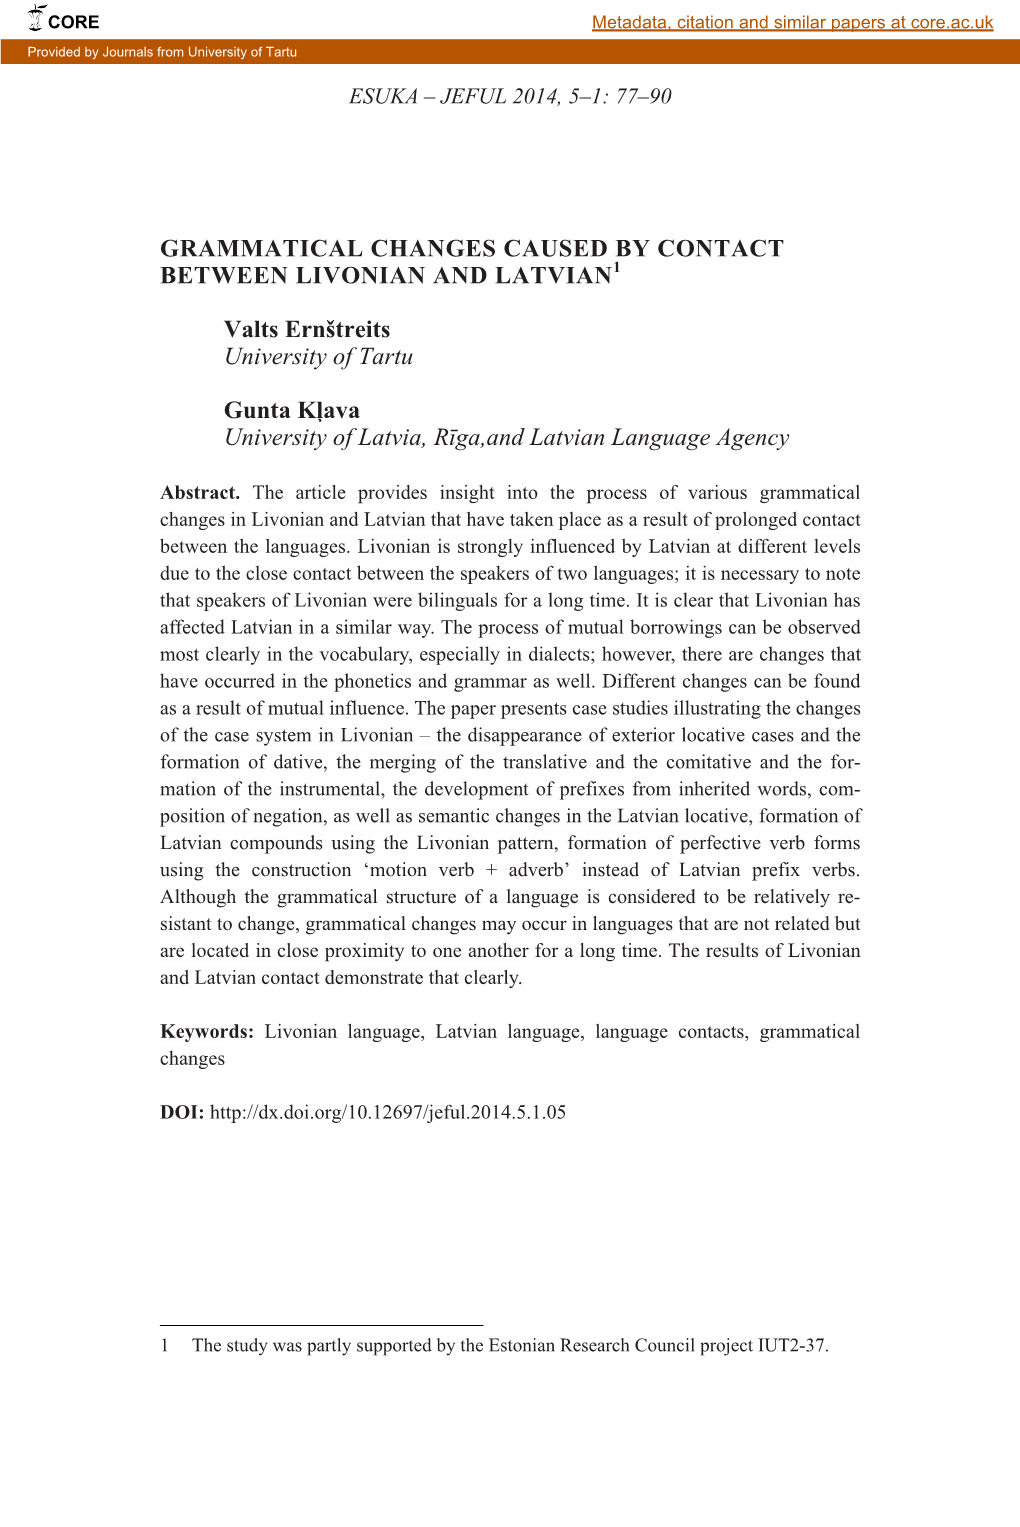 Grammatical Changes Caused by Contact Between Livonian and Latvian1